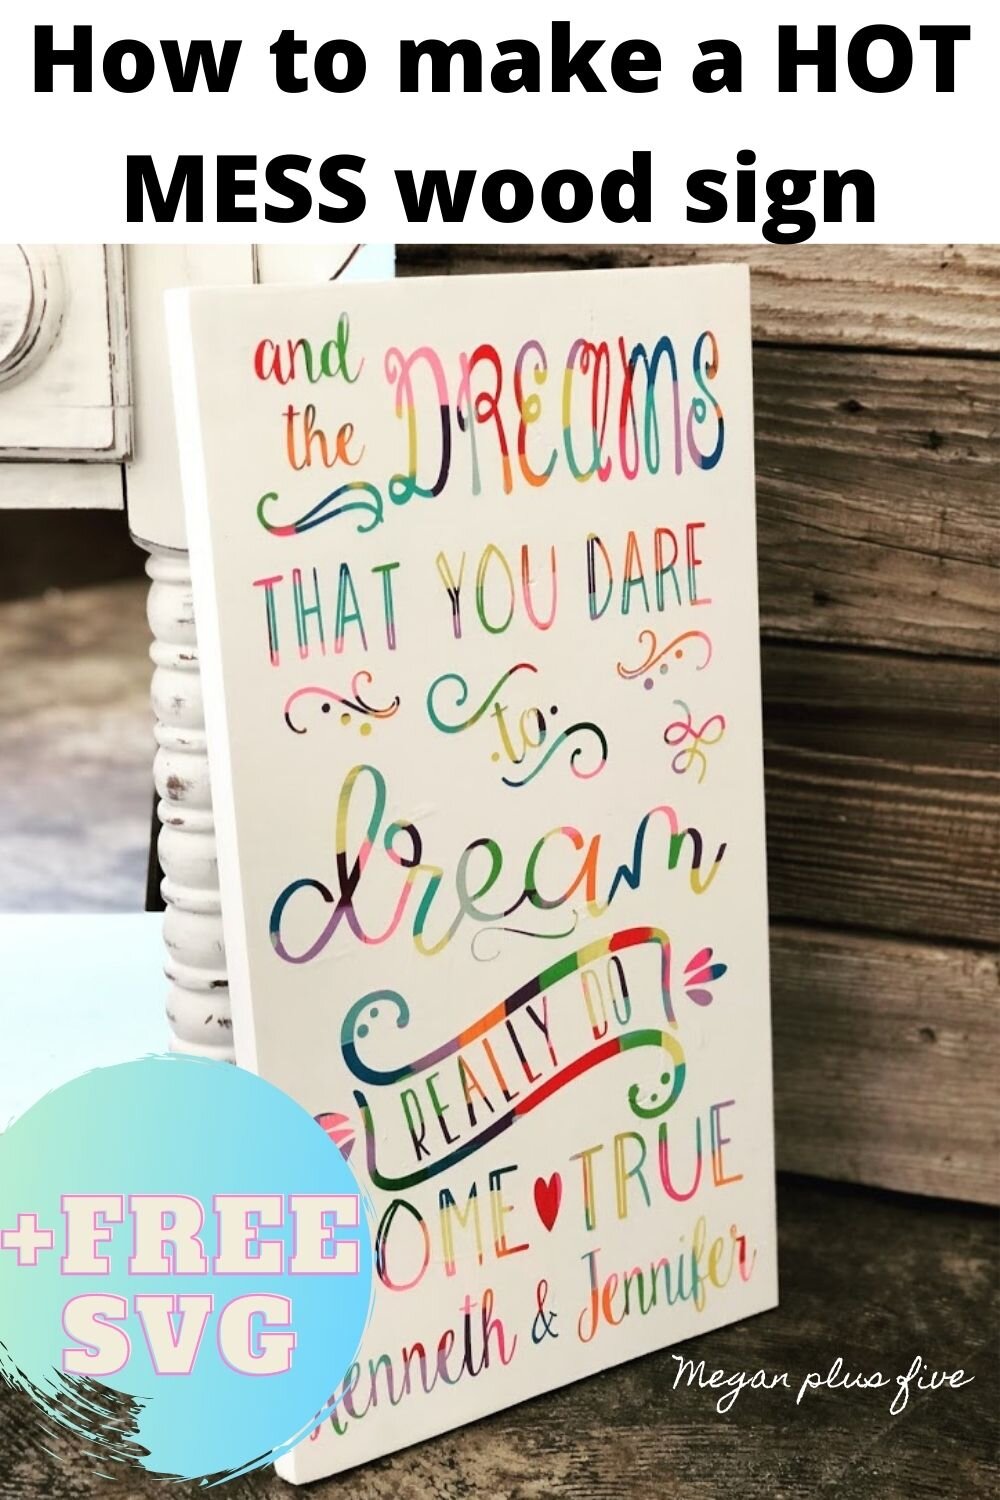 DIY hot mess colorful wood sign, dreams that you dare to dream really do come true sign